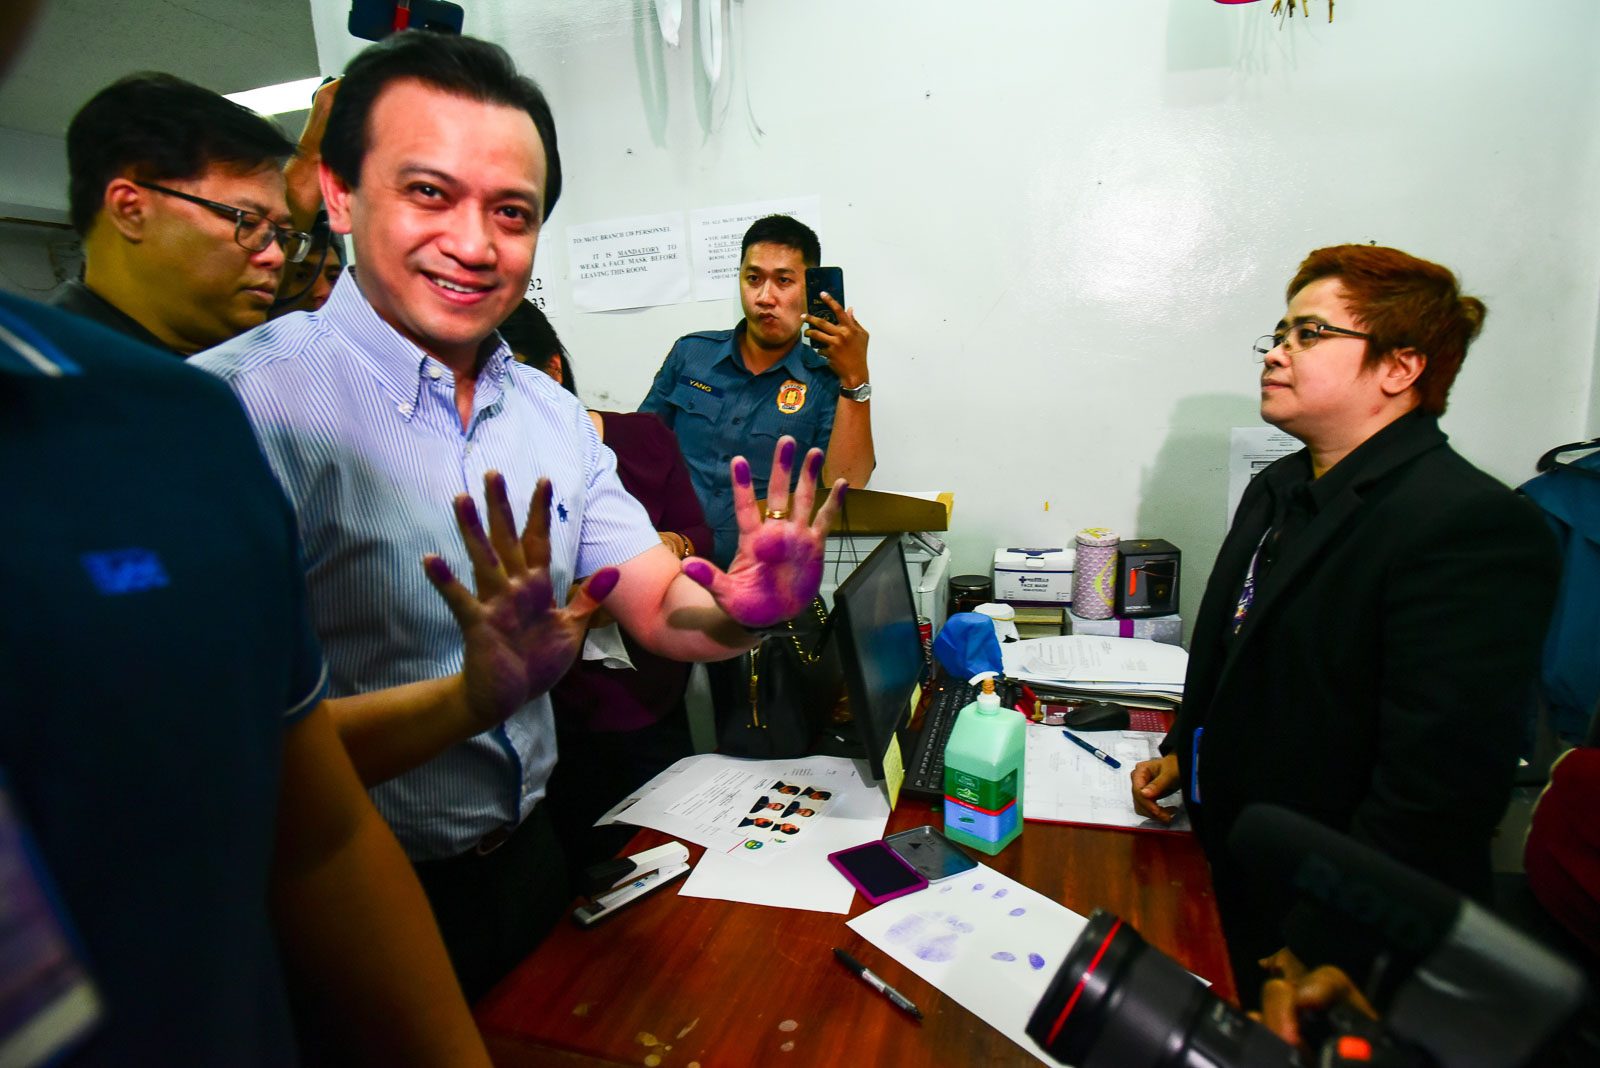 With 14 cases, Trillanes awaits fate for non-bailable kidnapping